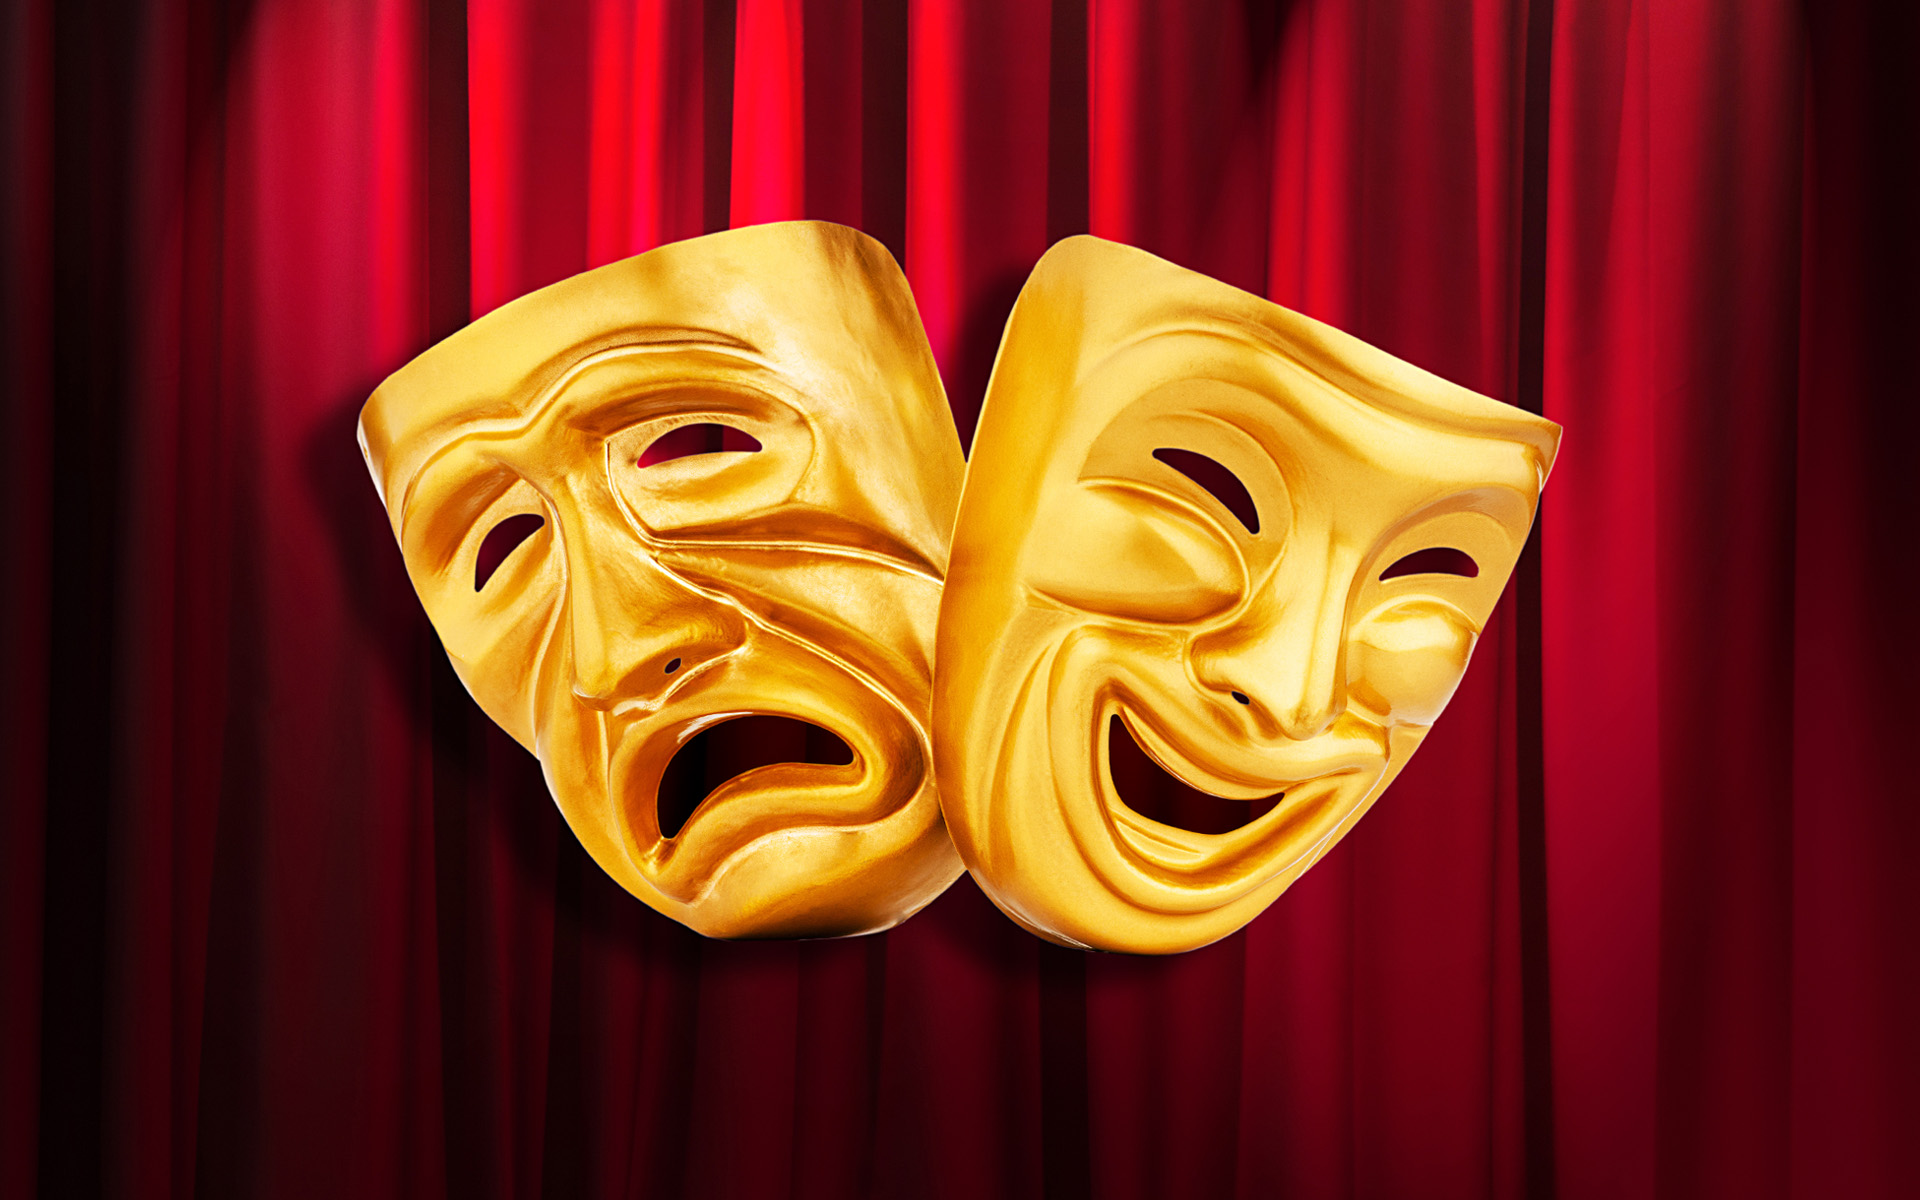 The tragedy and comedy masks with a red curtain backdrop.